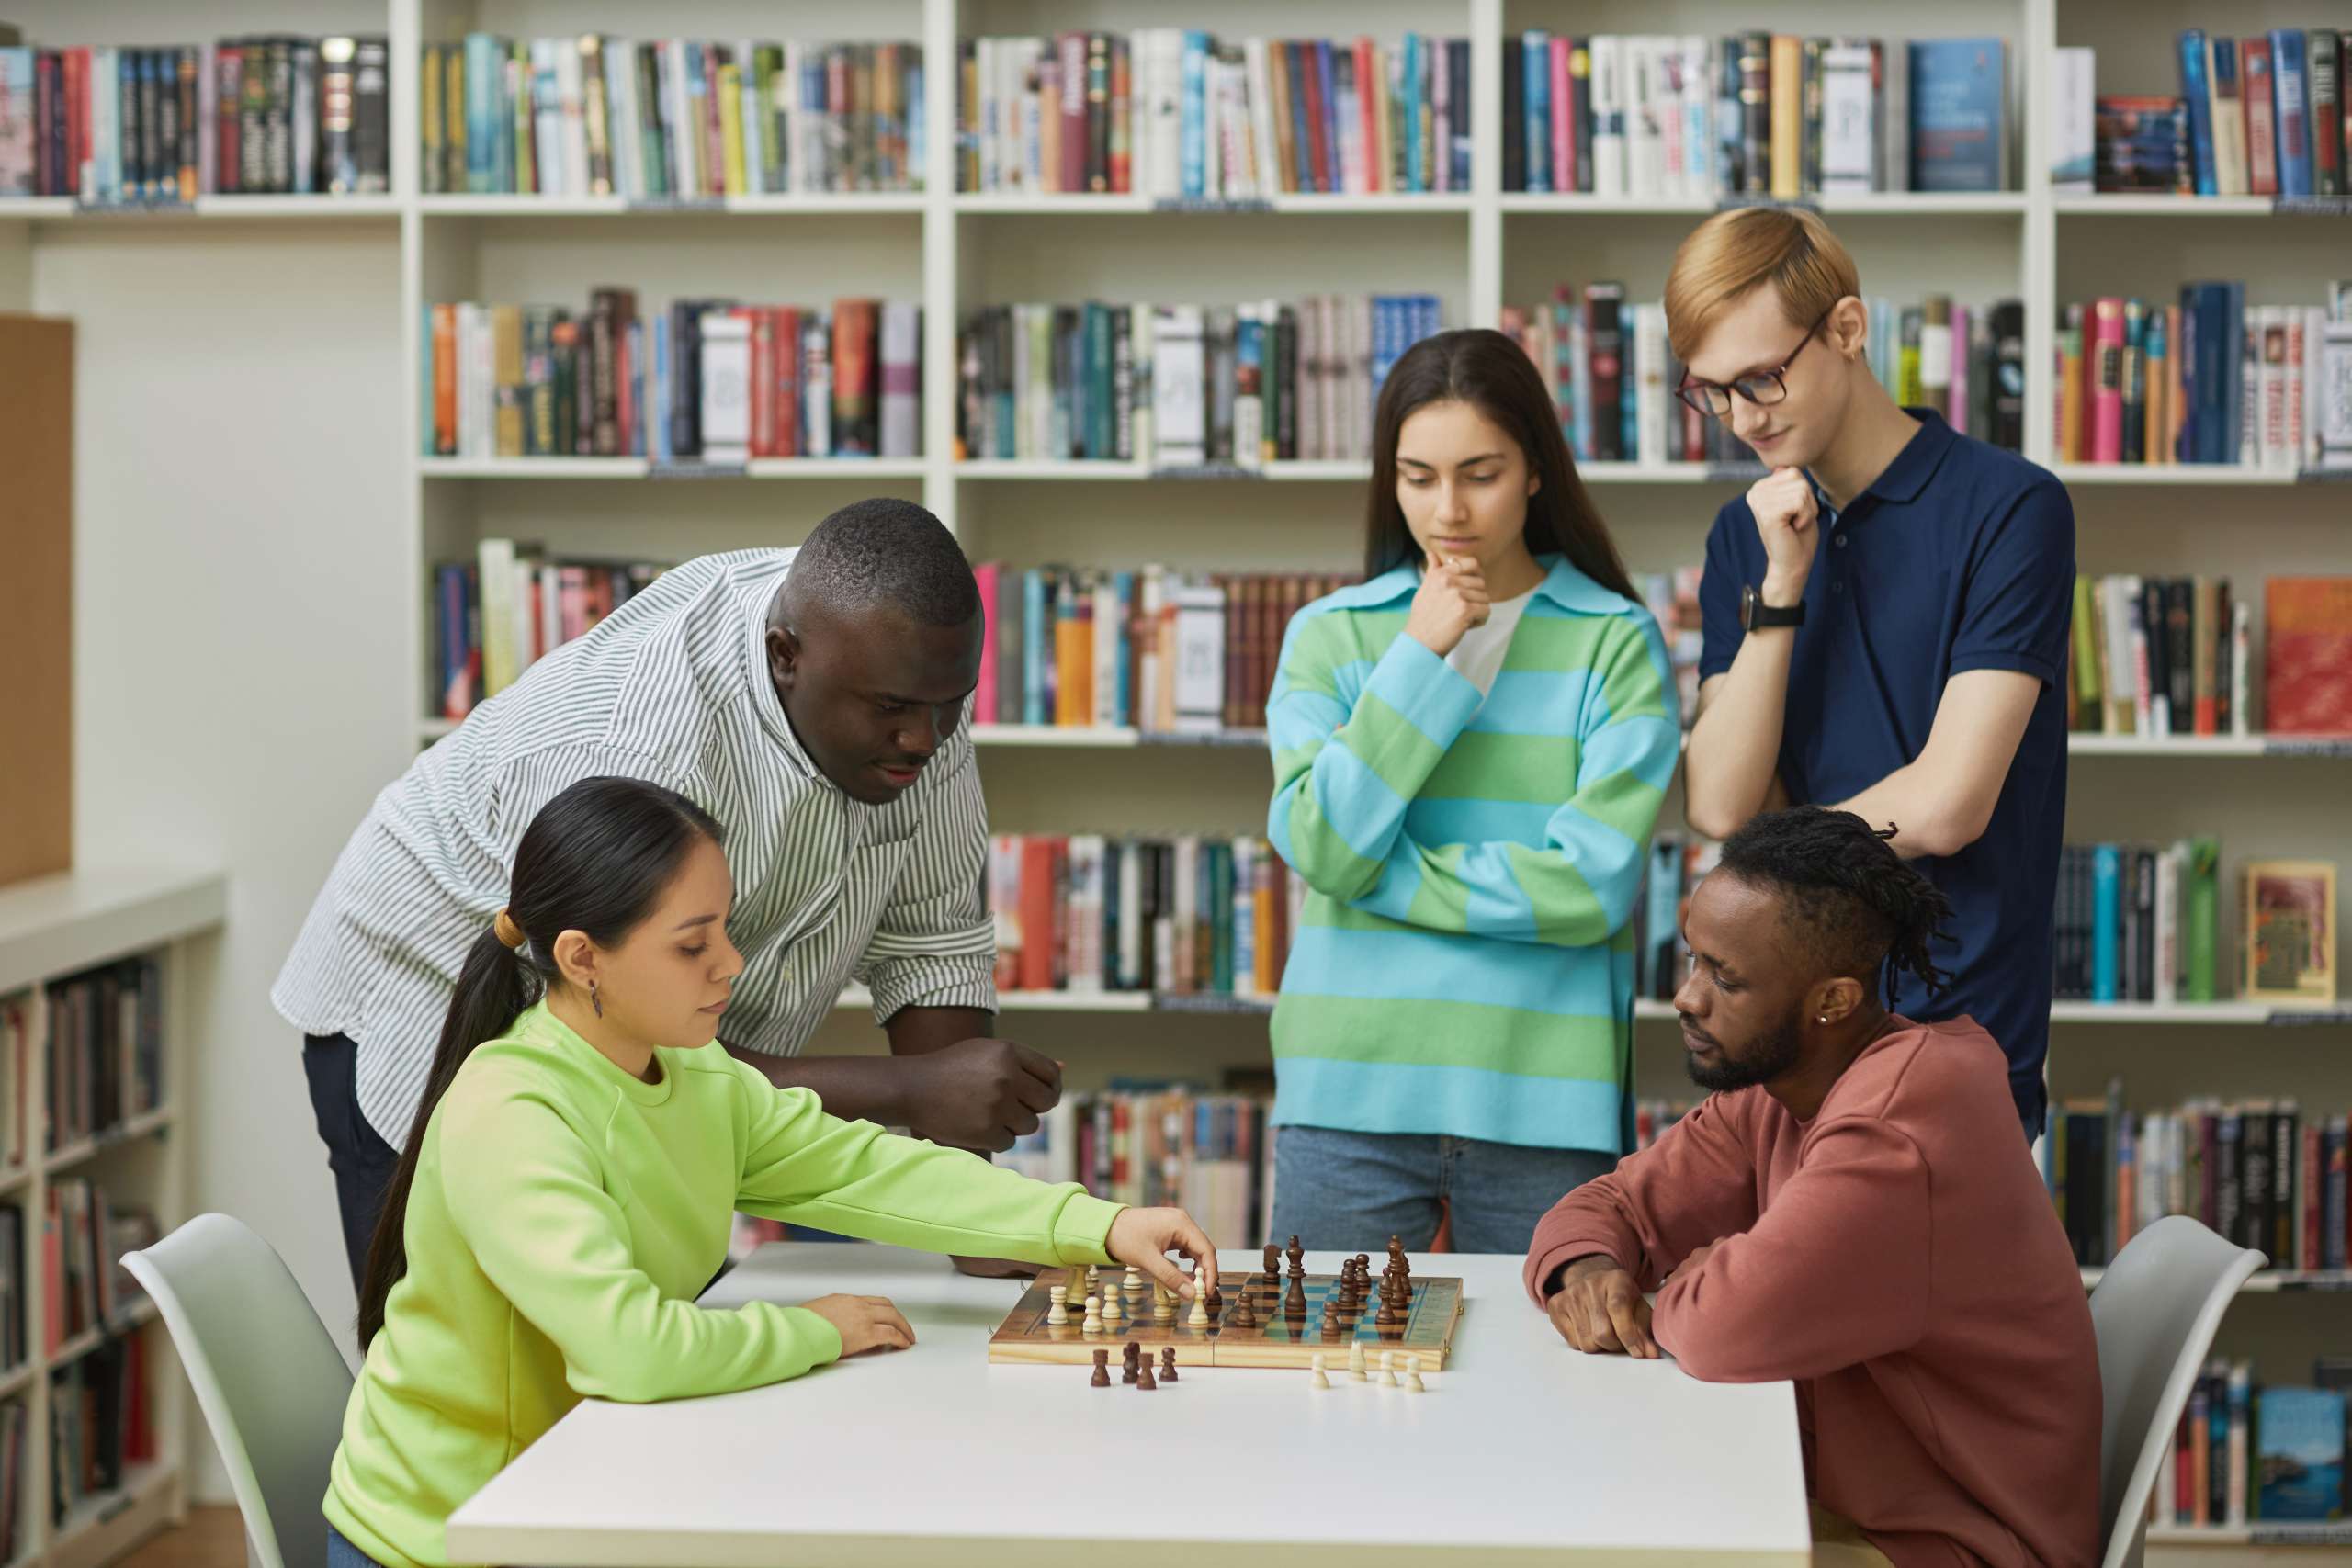 Group Chess Classes: Learn and Grow with ProChessmates